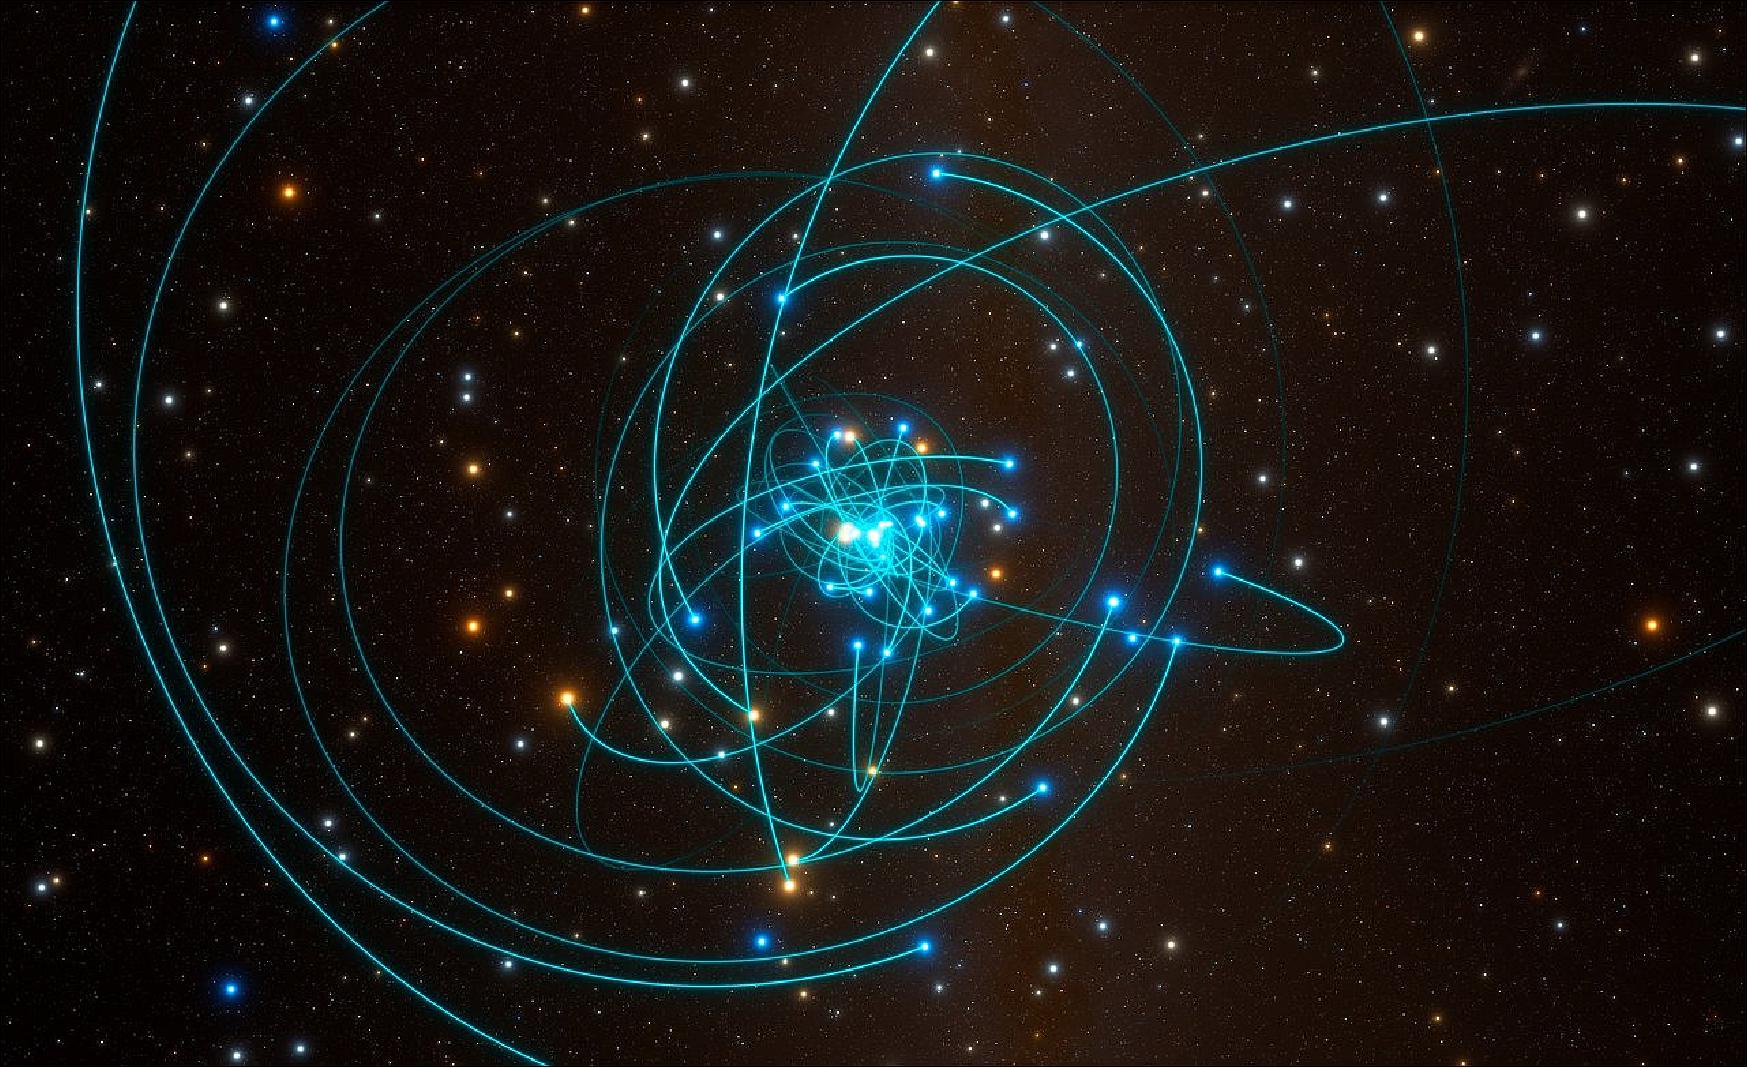 Figure 66: Cosmic swarm of bees: This simulation shows the orbits of stars very close to the supermassive black hole at the heart of the Milky Way. One of these stars, named S2, orbits every 16 years and is passing very close to the black hole in May 2018 (image credit: ESO/L. Calçada/spaceengine.org)